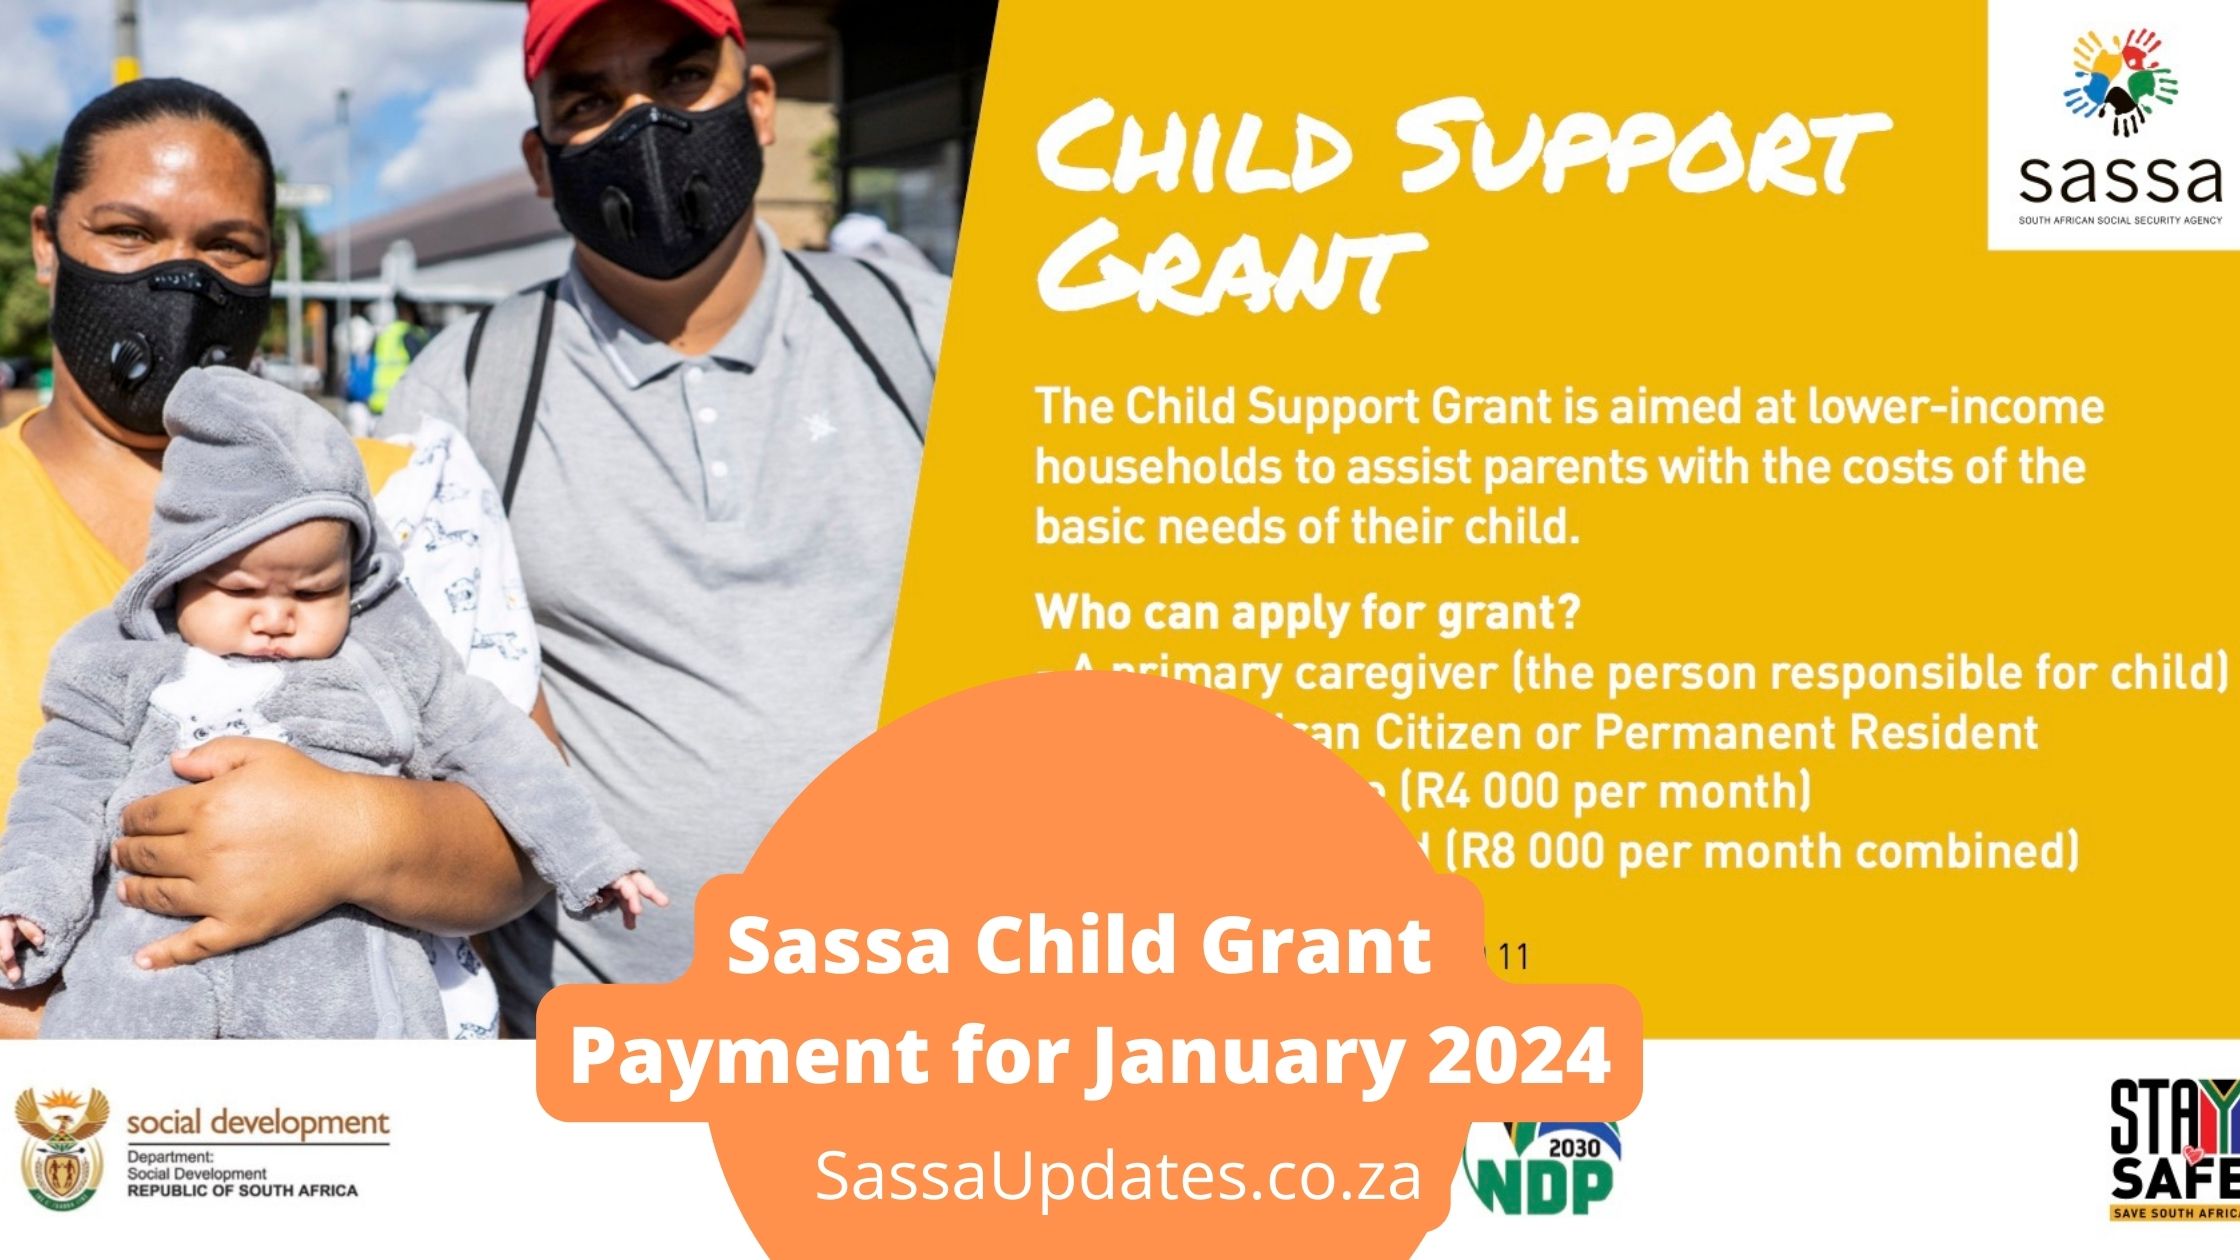 Sassa Child Grant Payment for January 2024